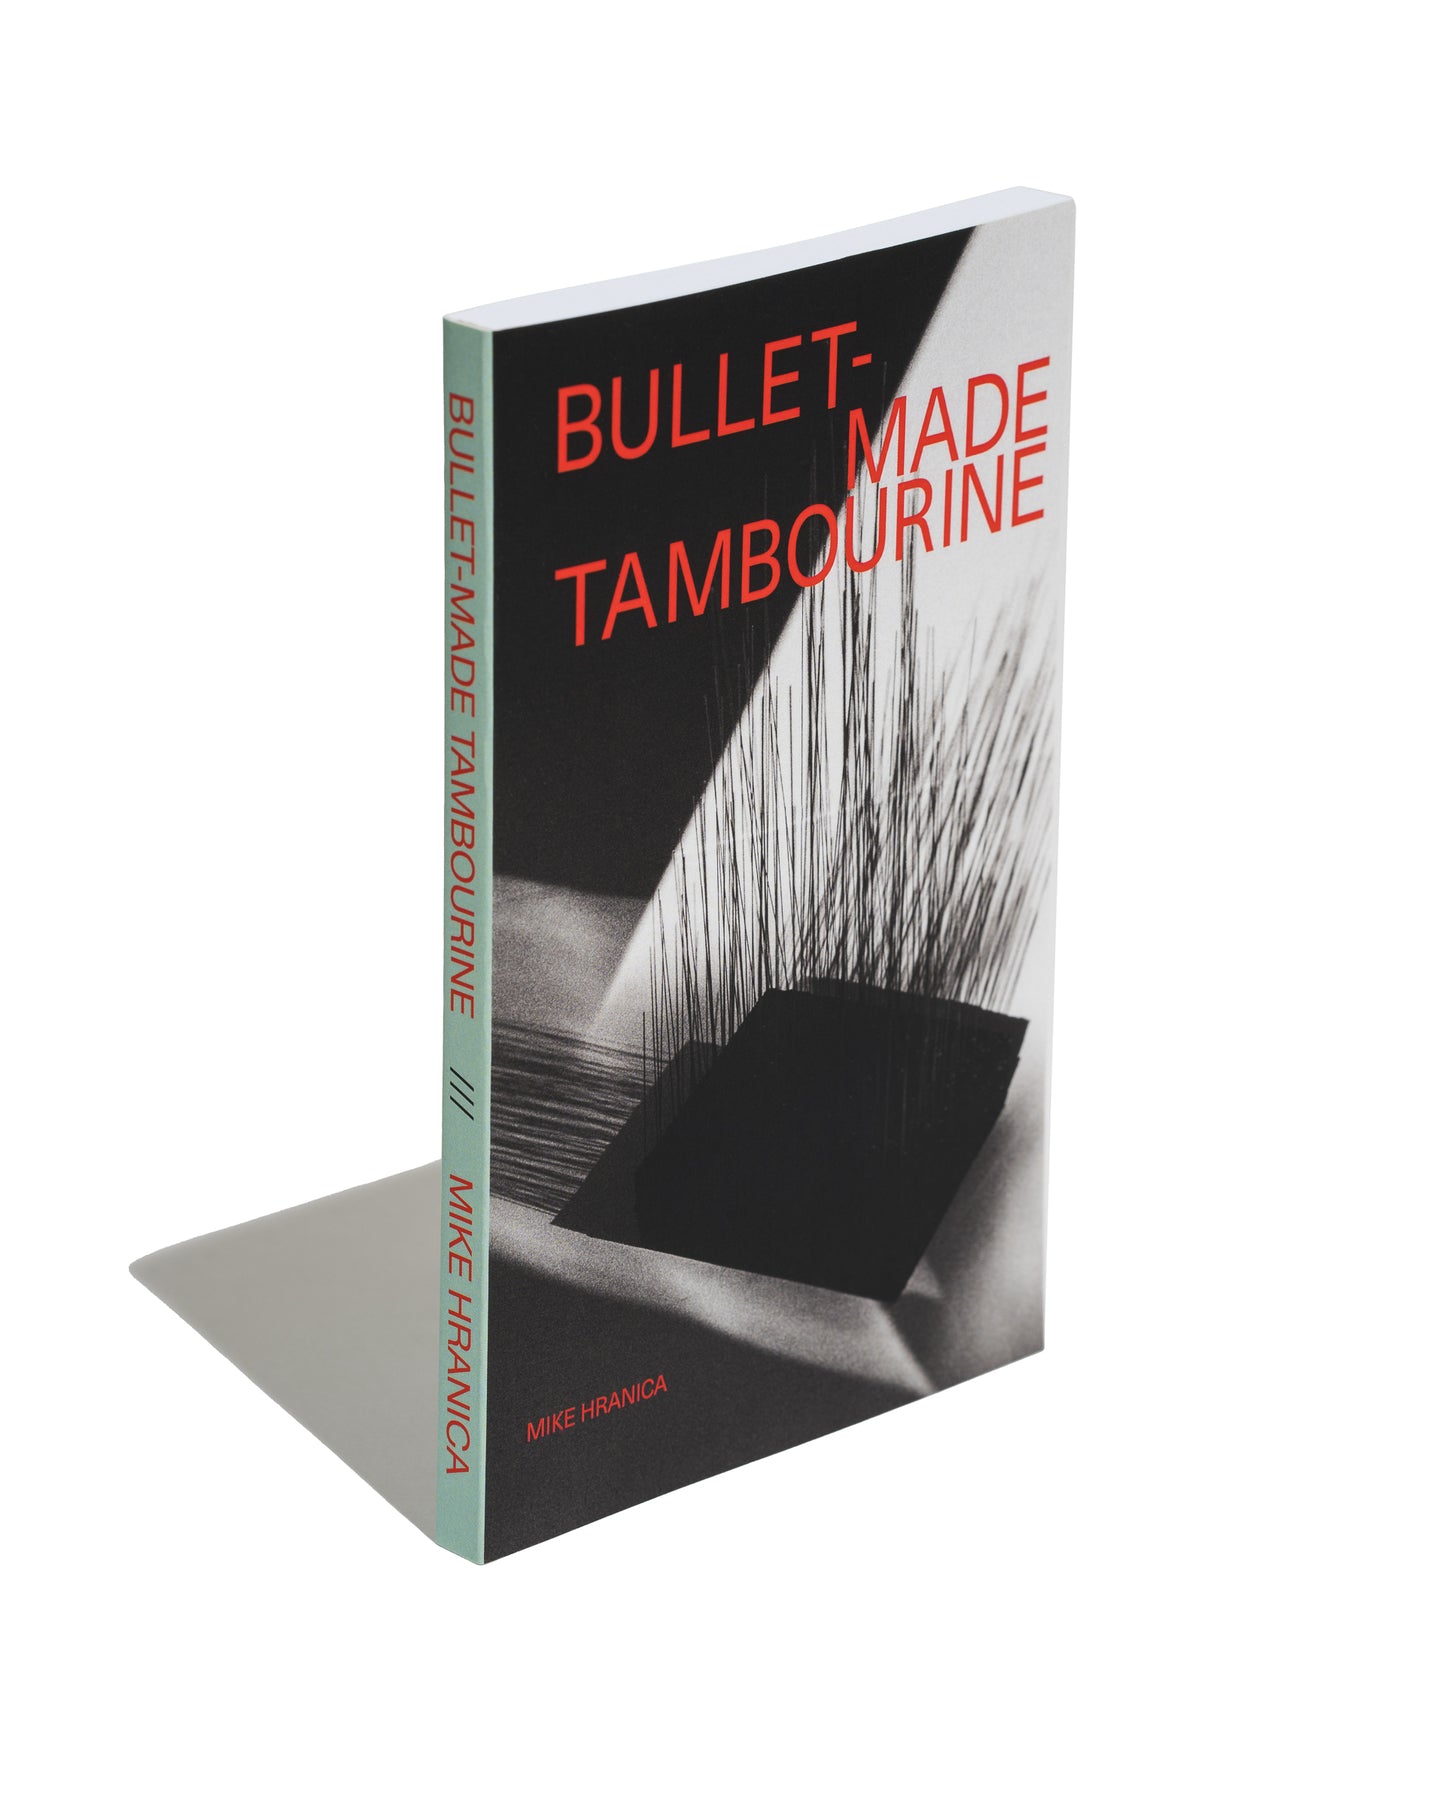 Bullet Made Tambourine (4th Edition)